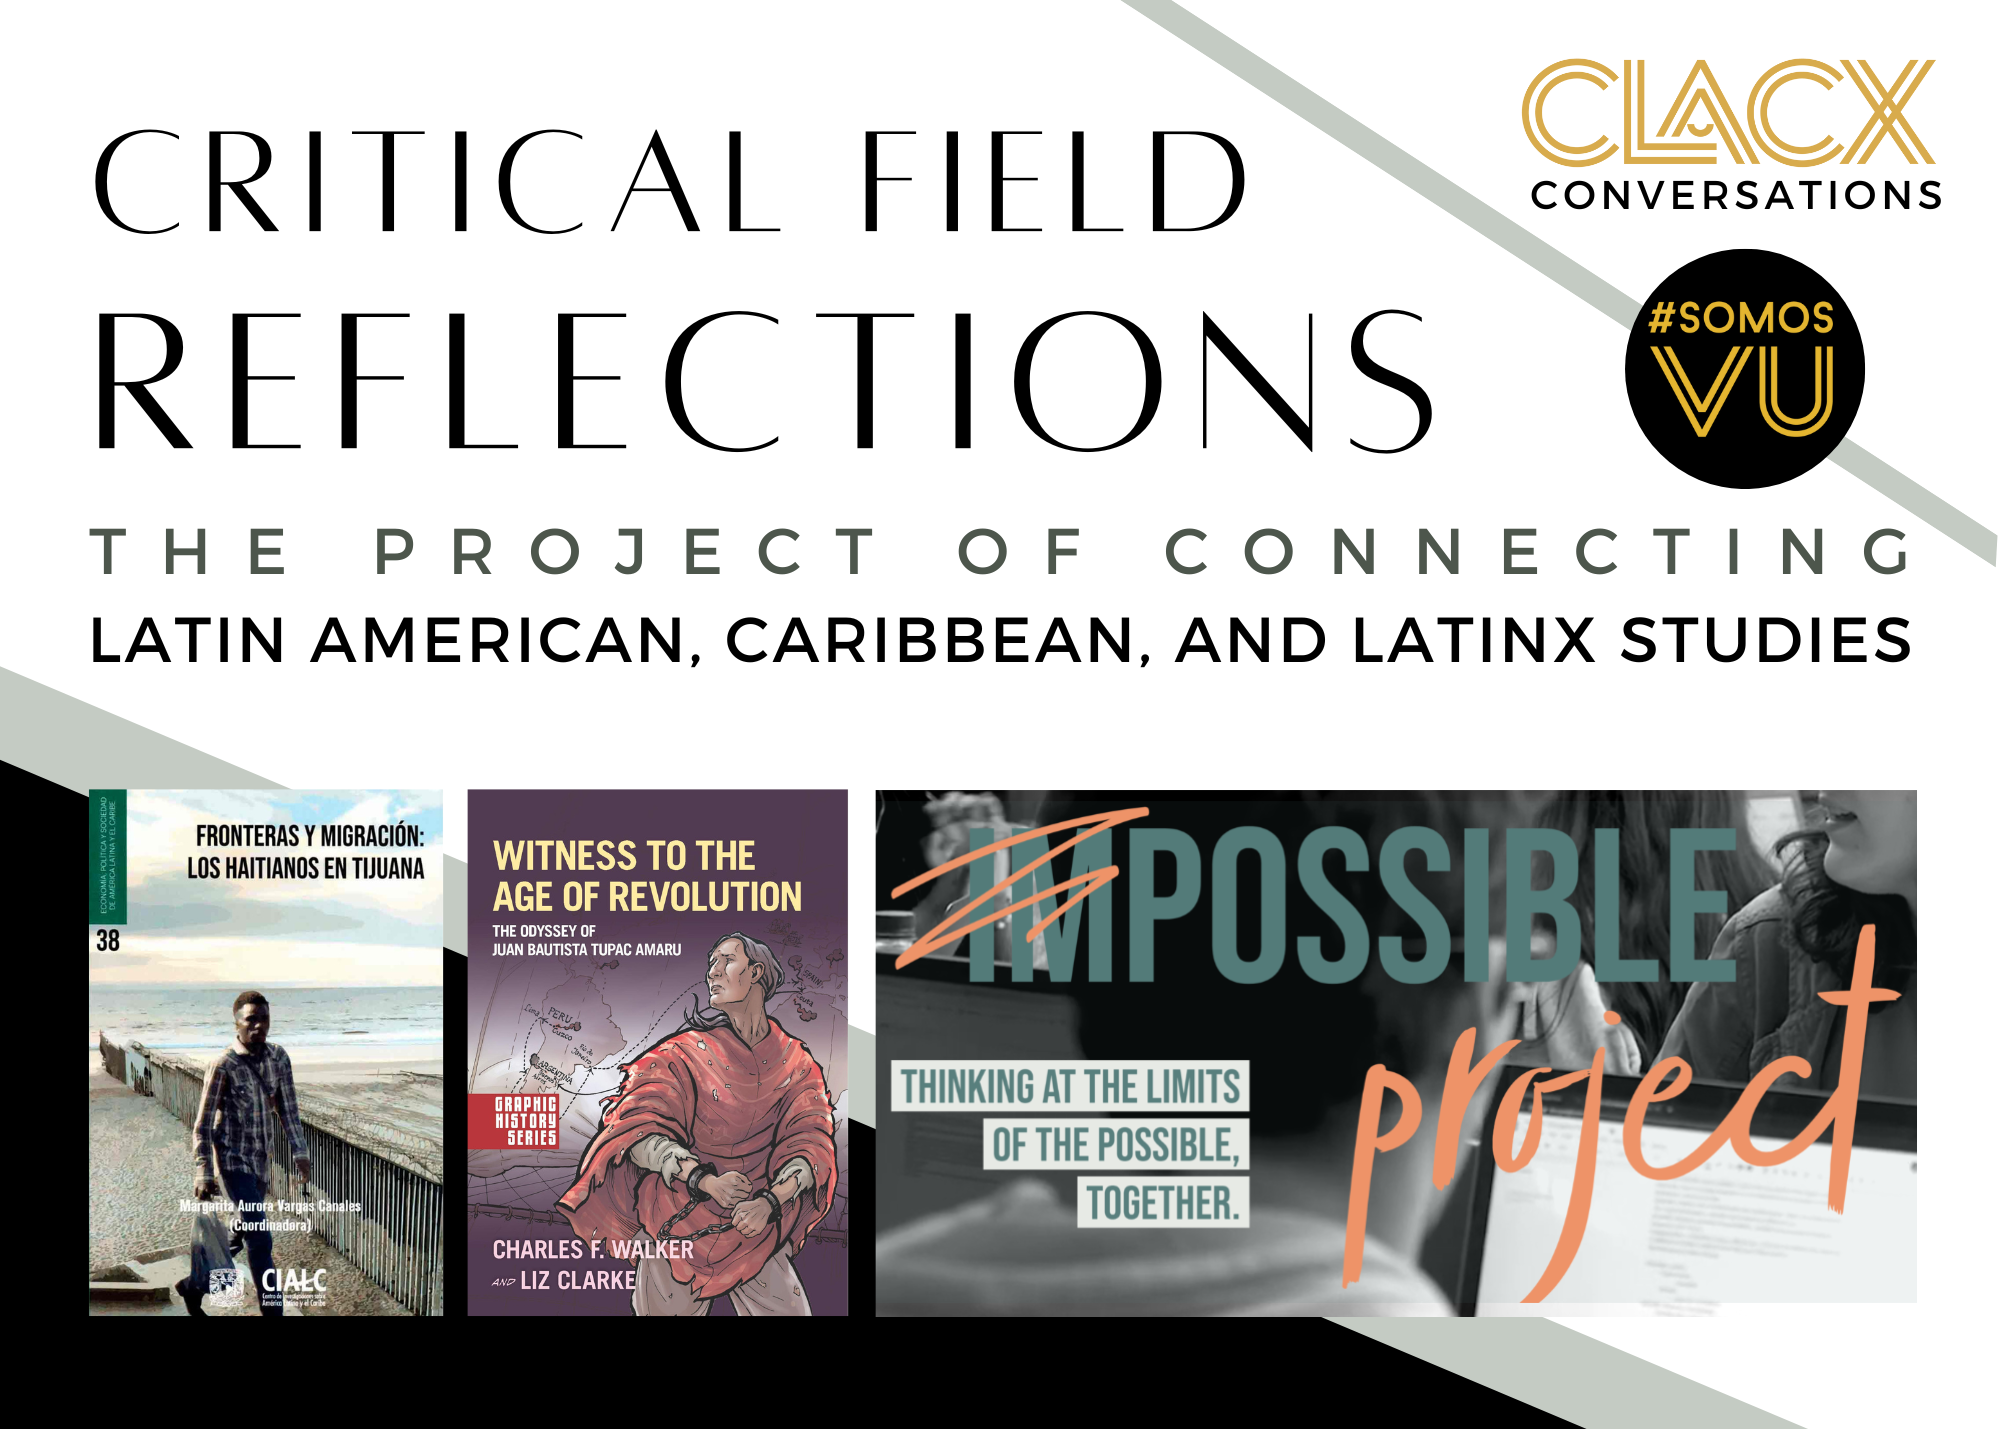 CLACX to host “Critical Field Reflections” symposium Sept. 22-23